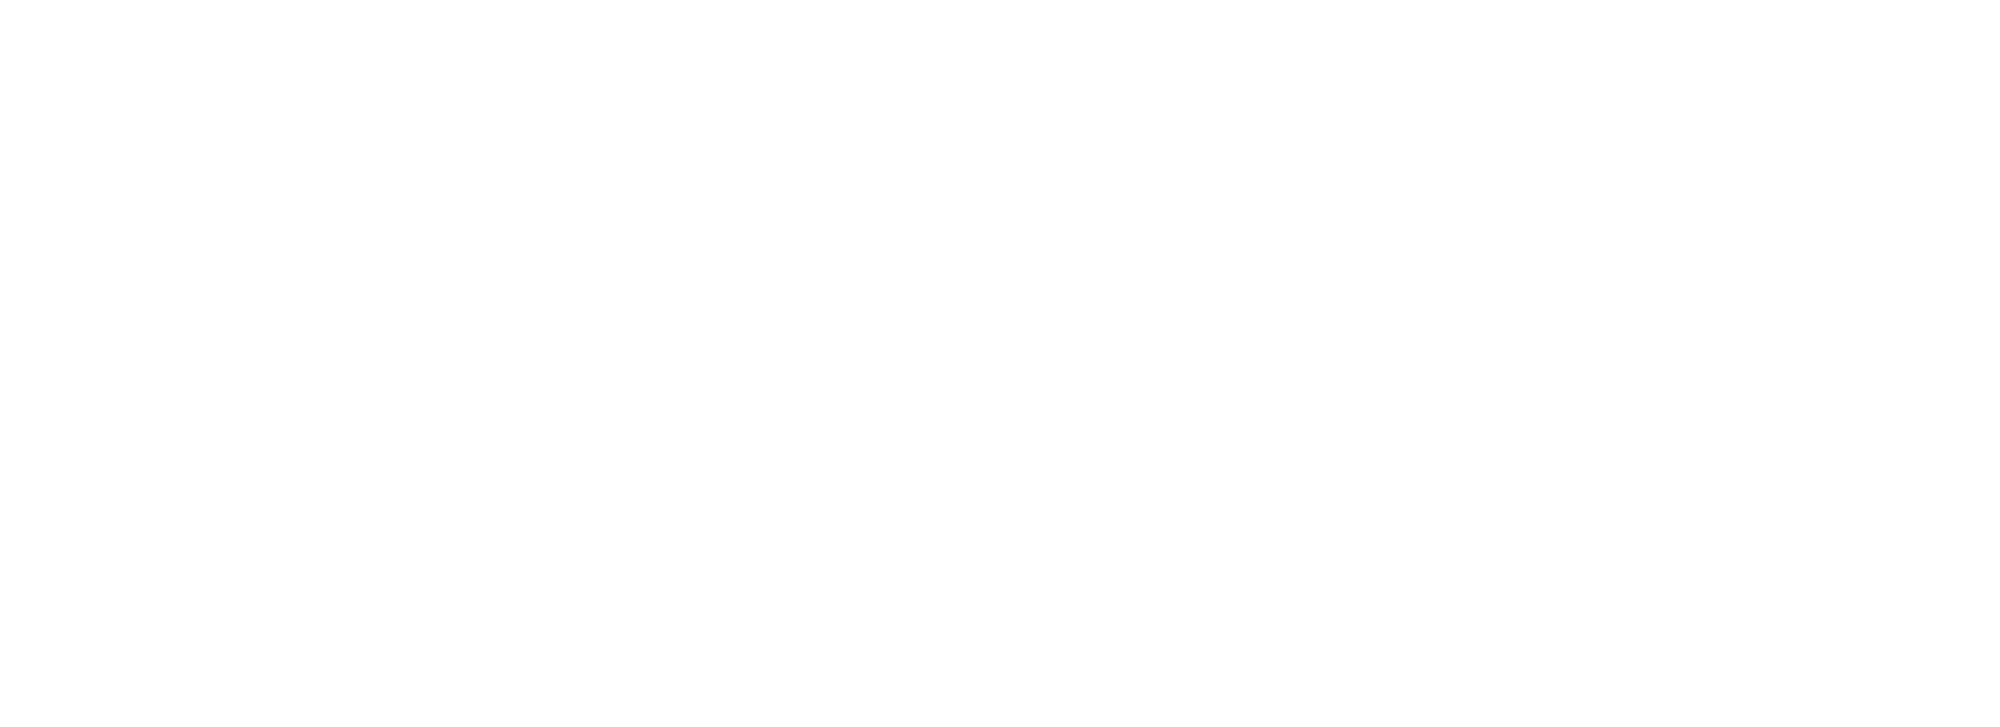 20% Off With Hemp Luxe Coupon Code